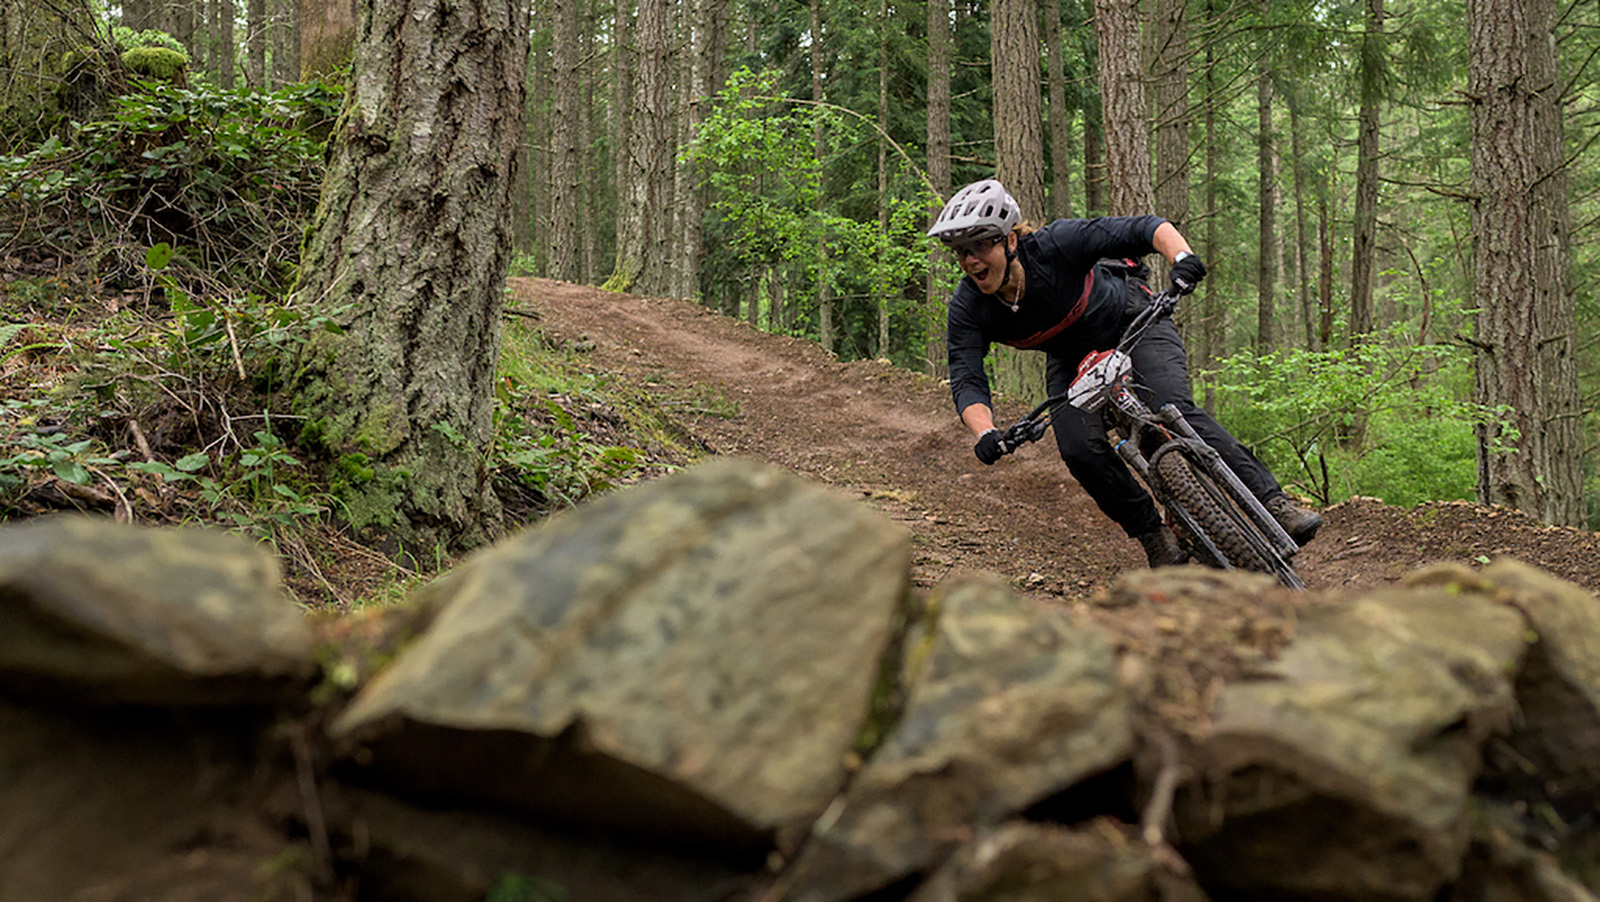 a rider takes a banked turn on a forested trail